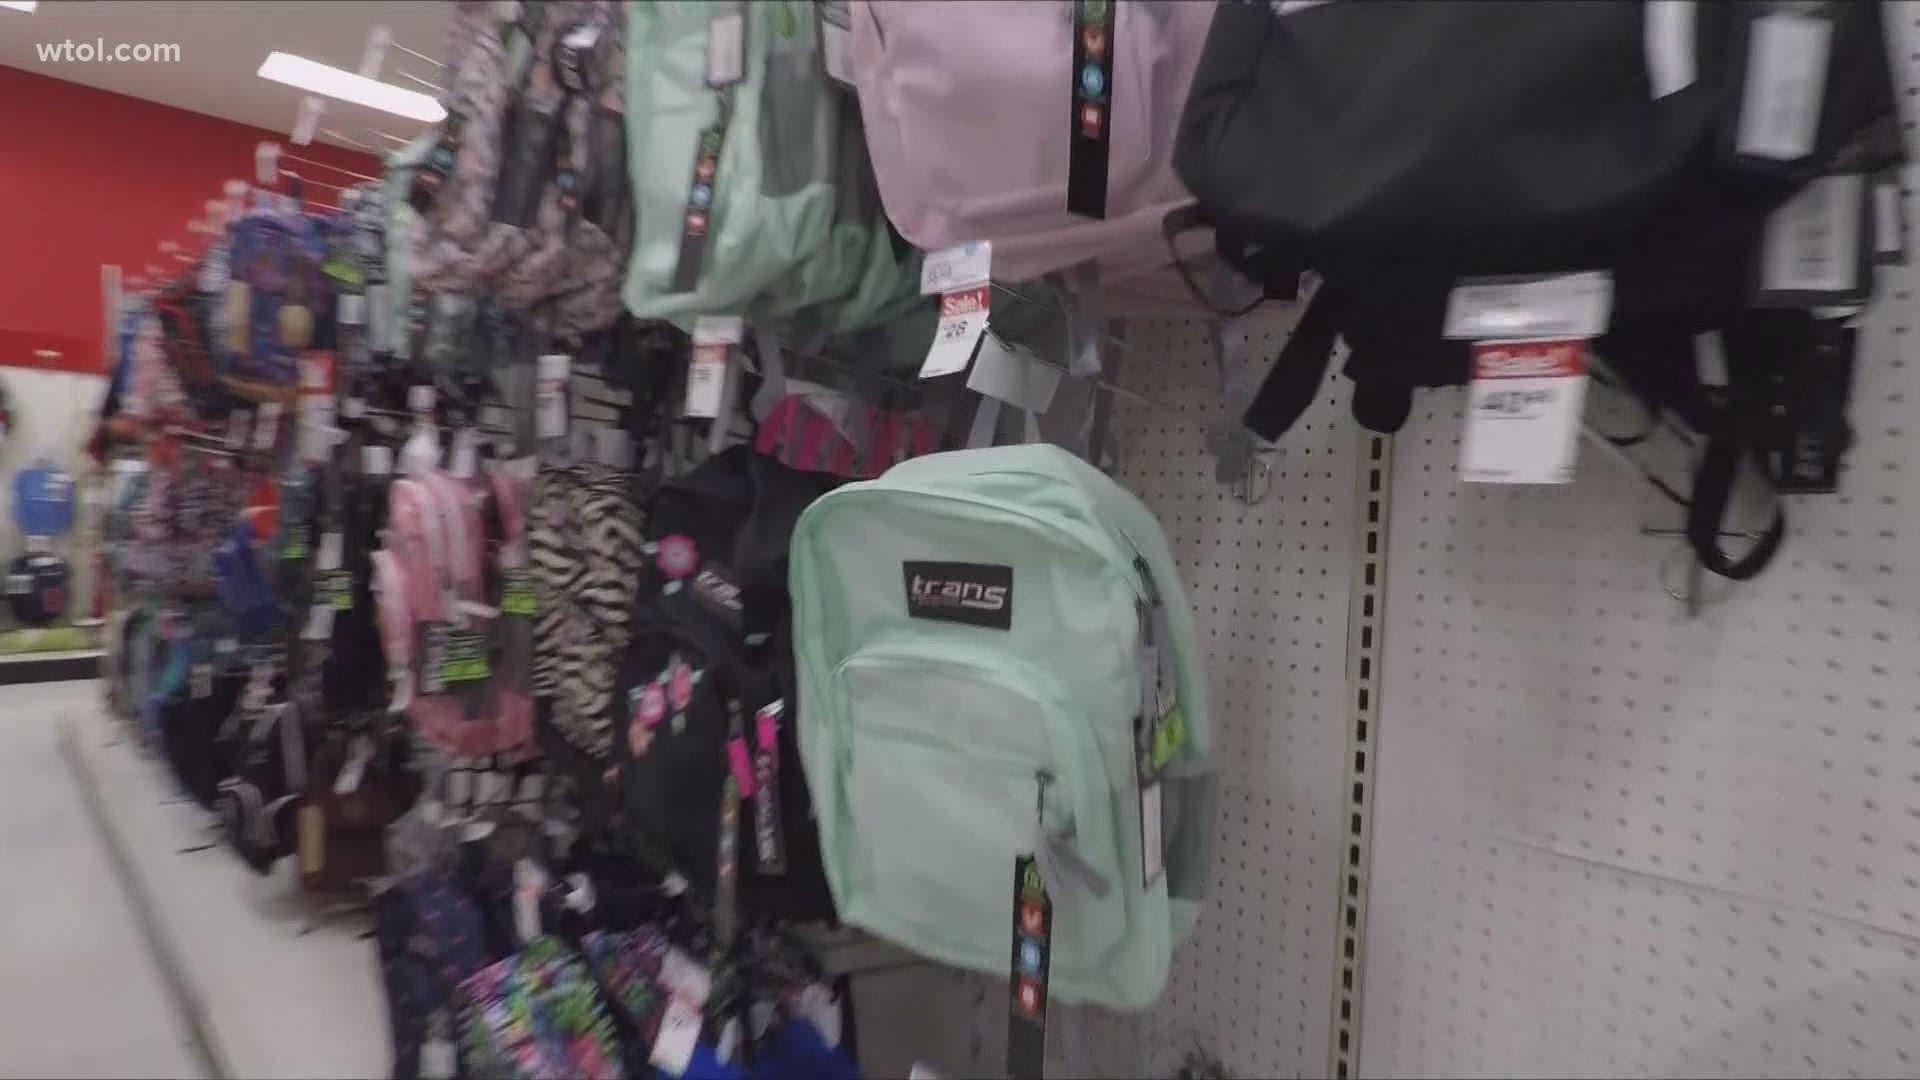 The annual school supply drive hands out more than 1,000 backpacks filled with supplies each year.